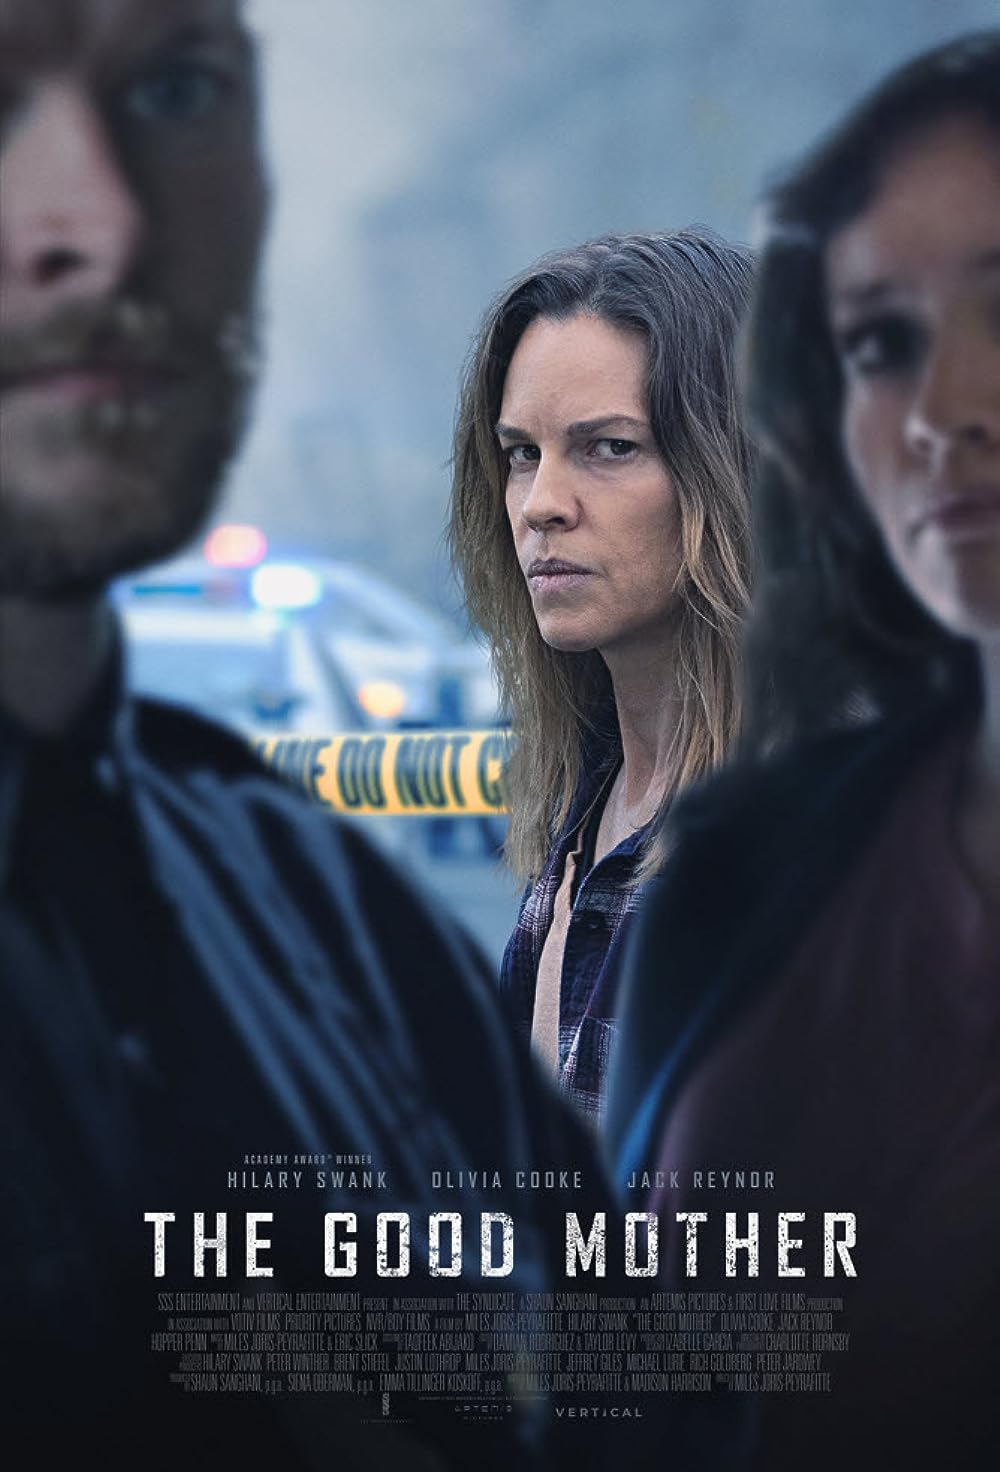 The Good Mother Trailer & Poster